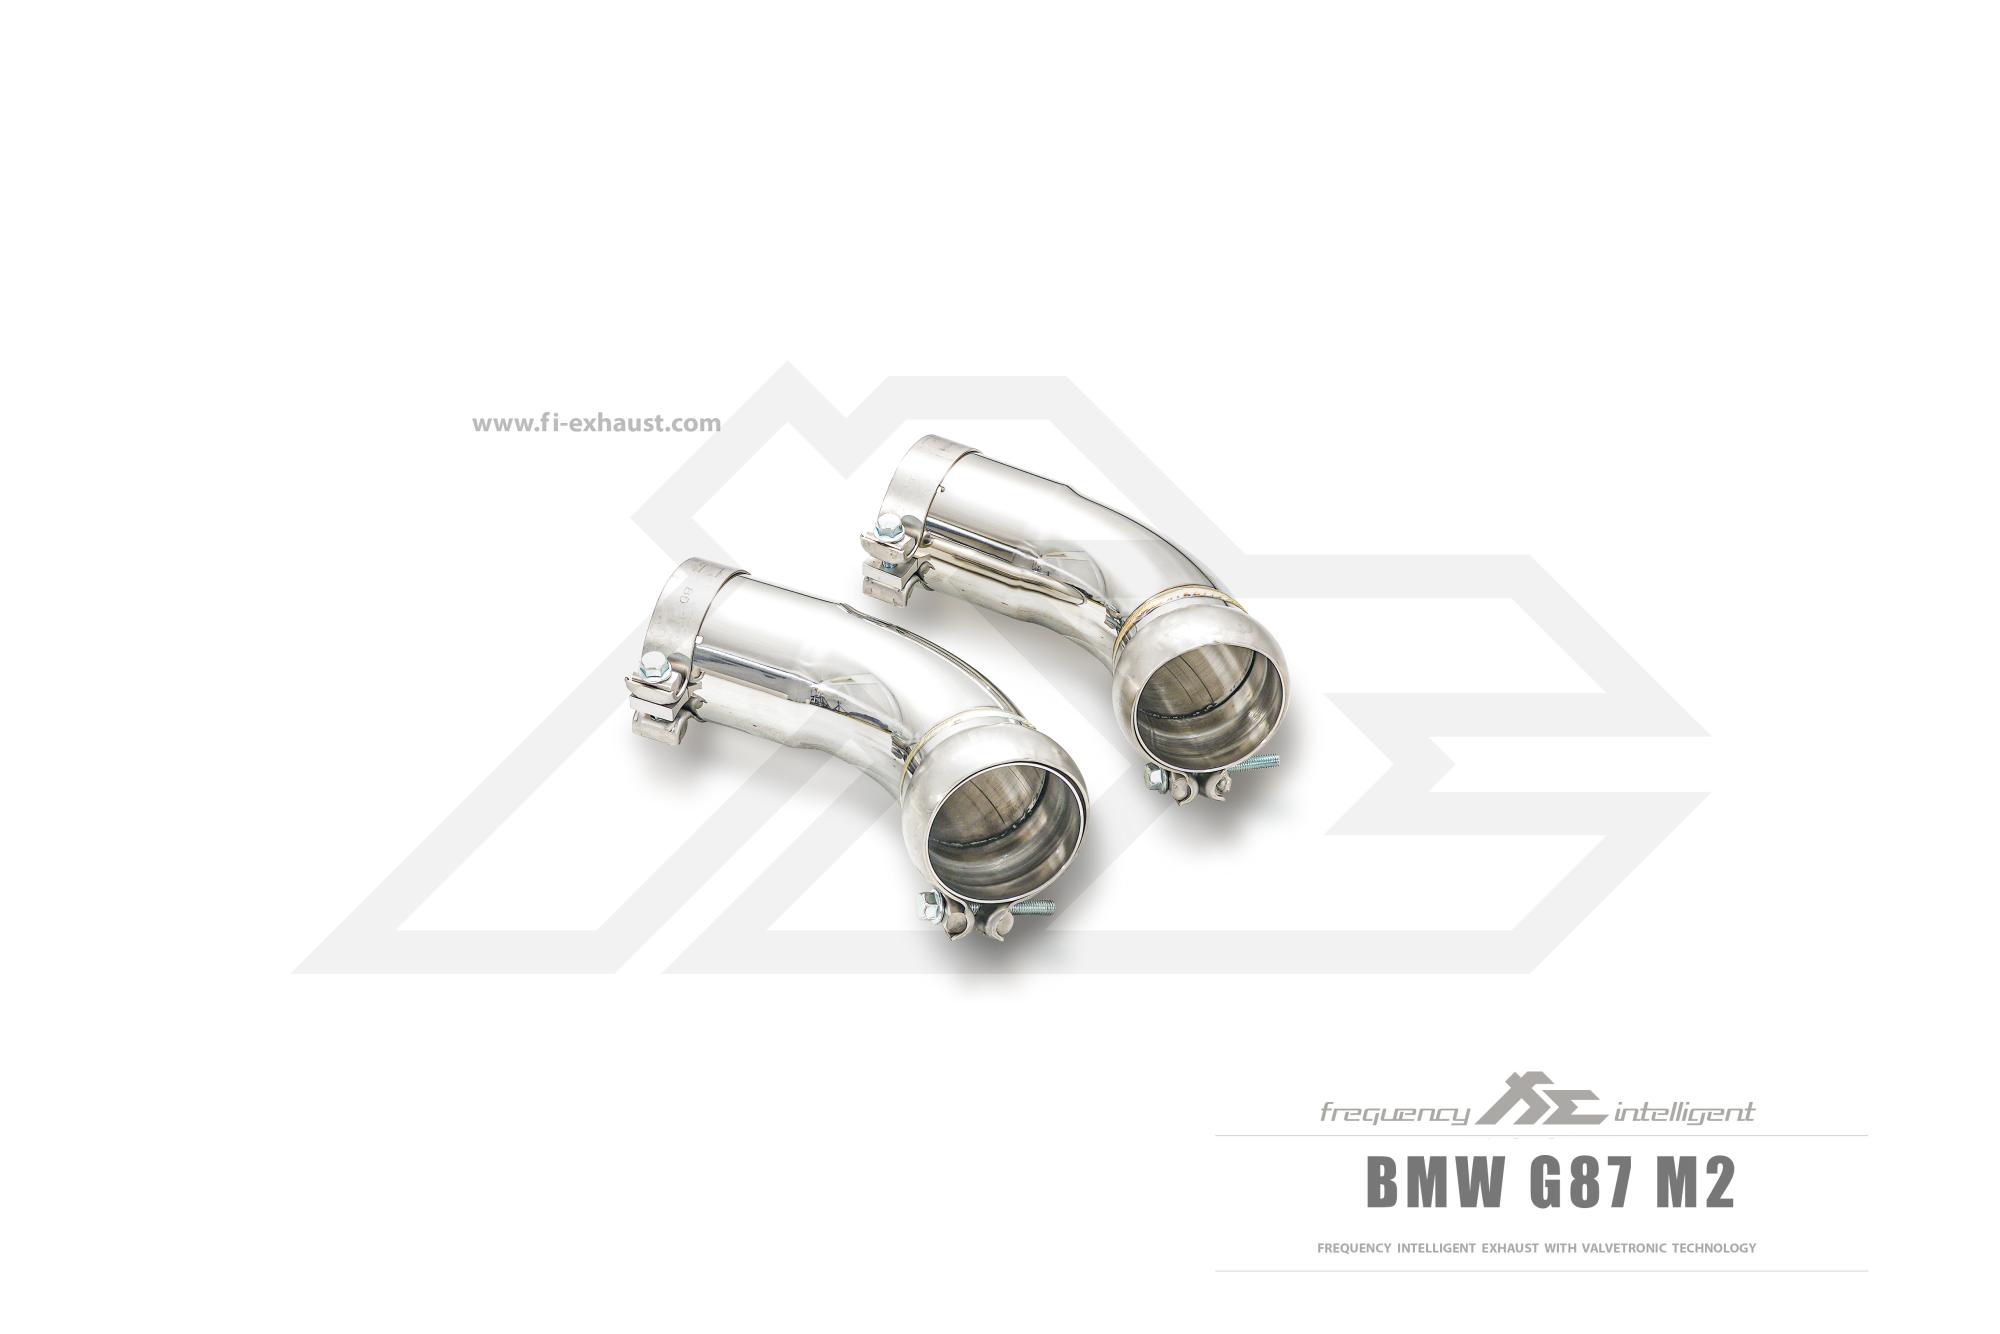 FI Exhaust BMW G87 M2 OPF / Non-OPF Exhaust System